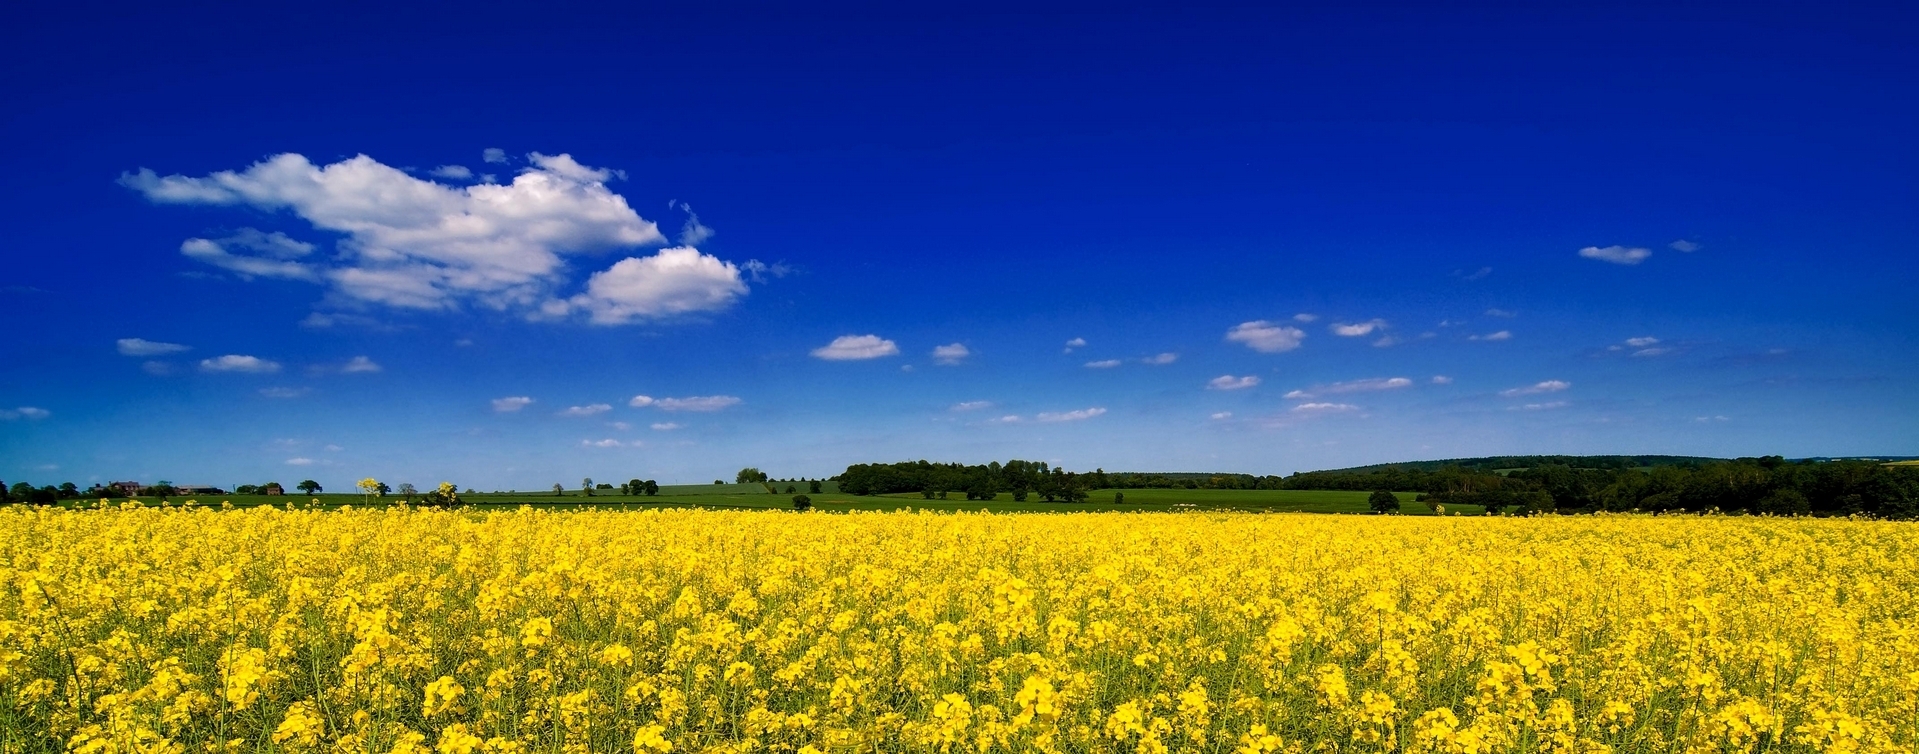 Rapeseed production faces decrease in Russia